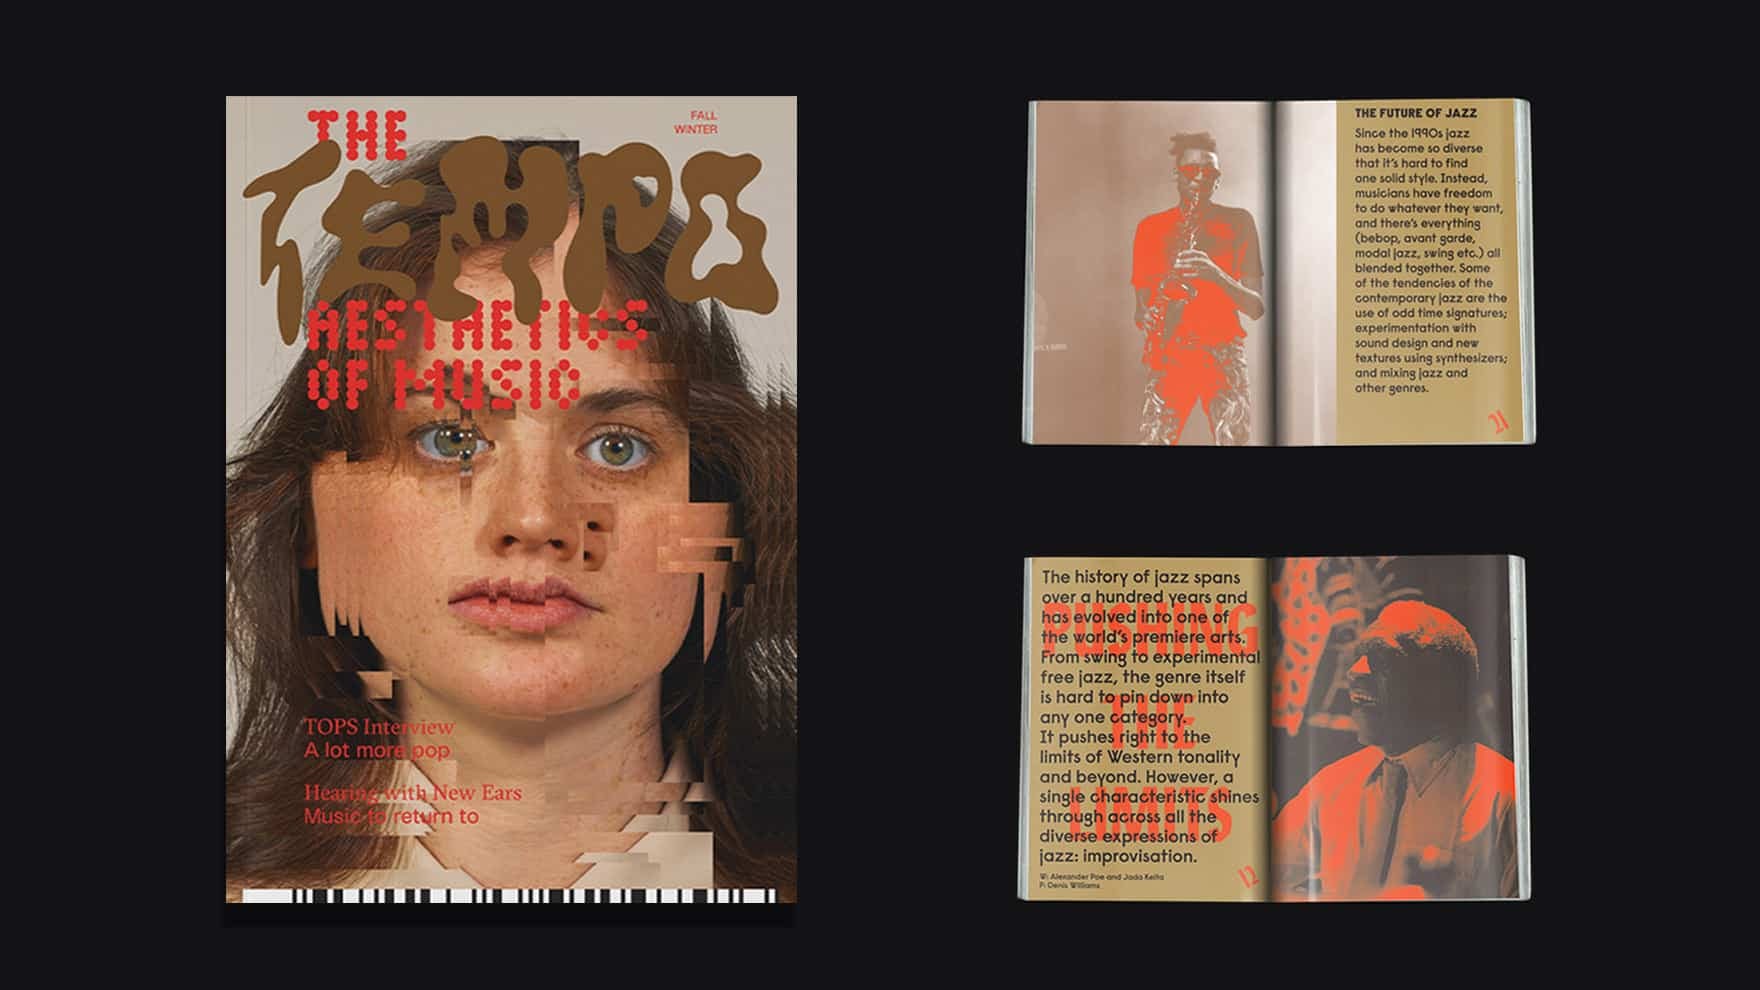 Pin on editorials and covers